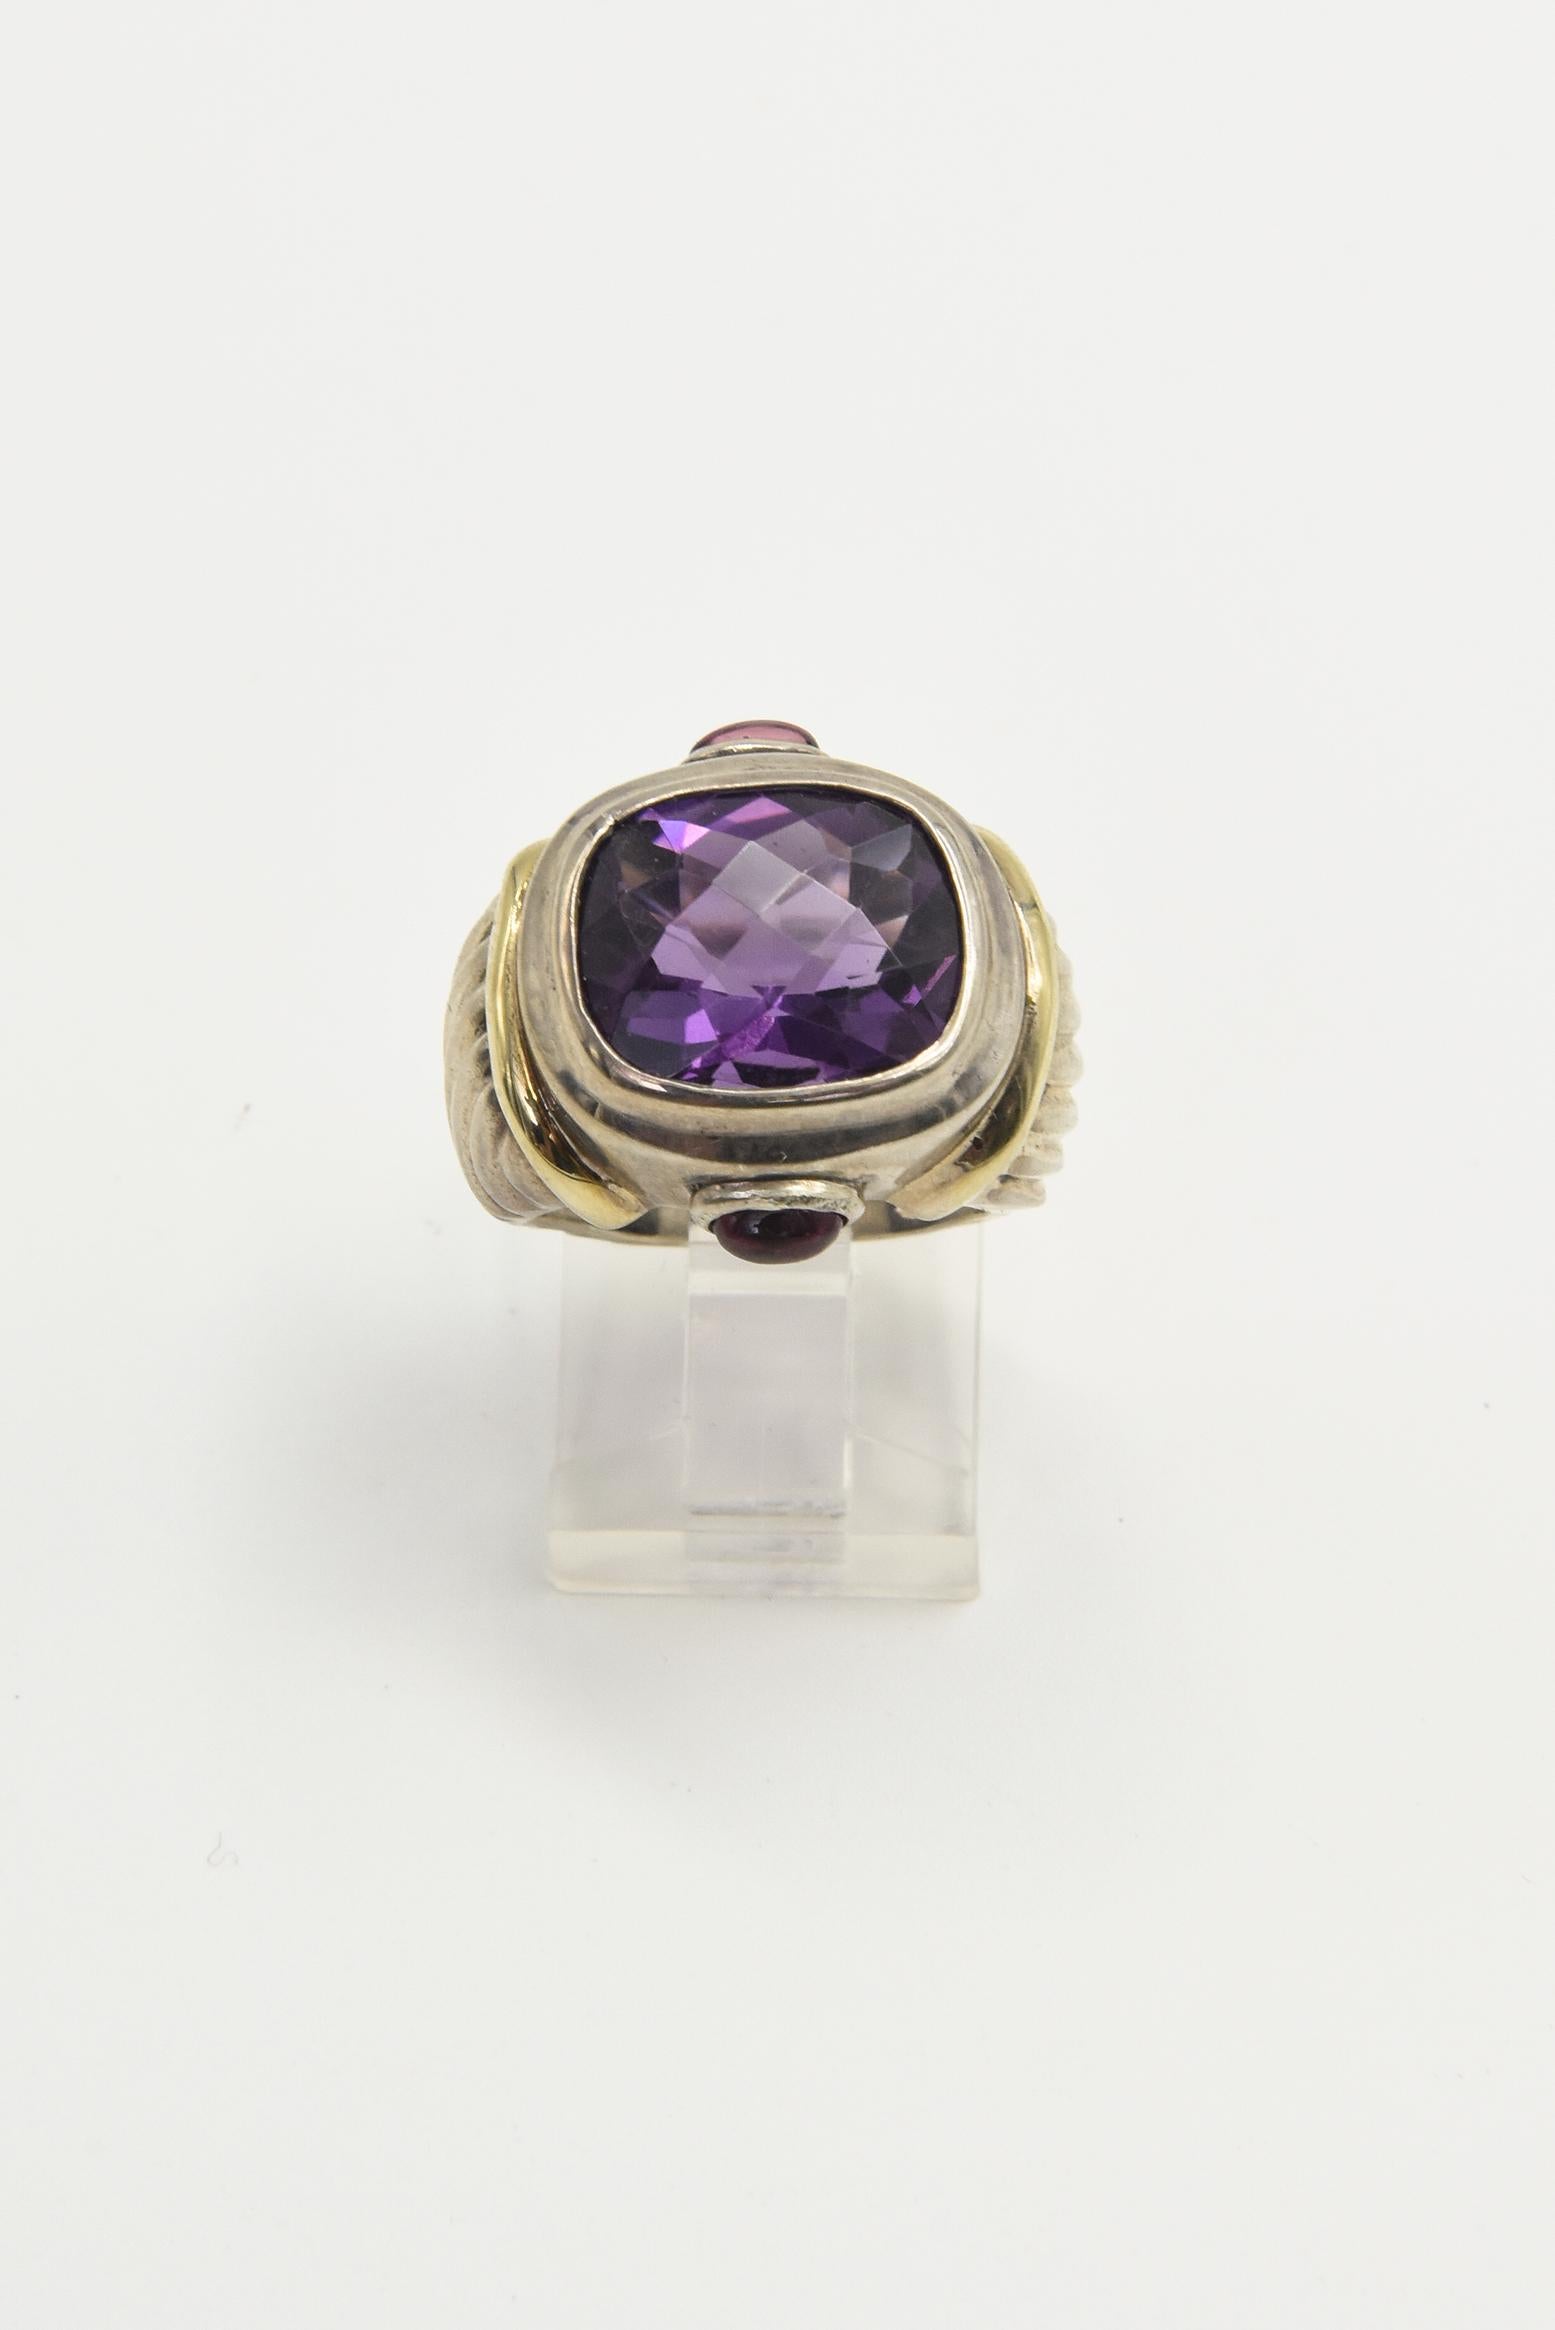 Vintage late 20th century David Yurman amethyst and garnet sterling silver and 14k gold Renaissance ring with cable band ring featuring a facetted cushion shaped amethyst and 2 cabochon garnets on the sides.  It has a 14k gold bar on the shoulders